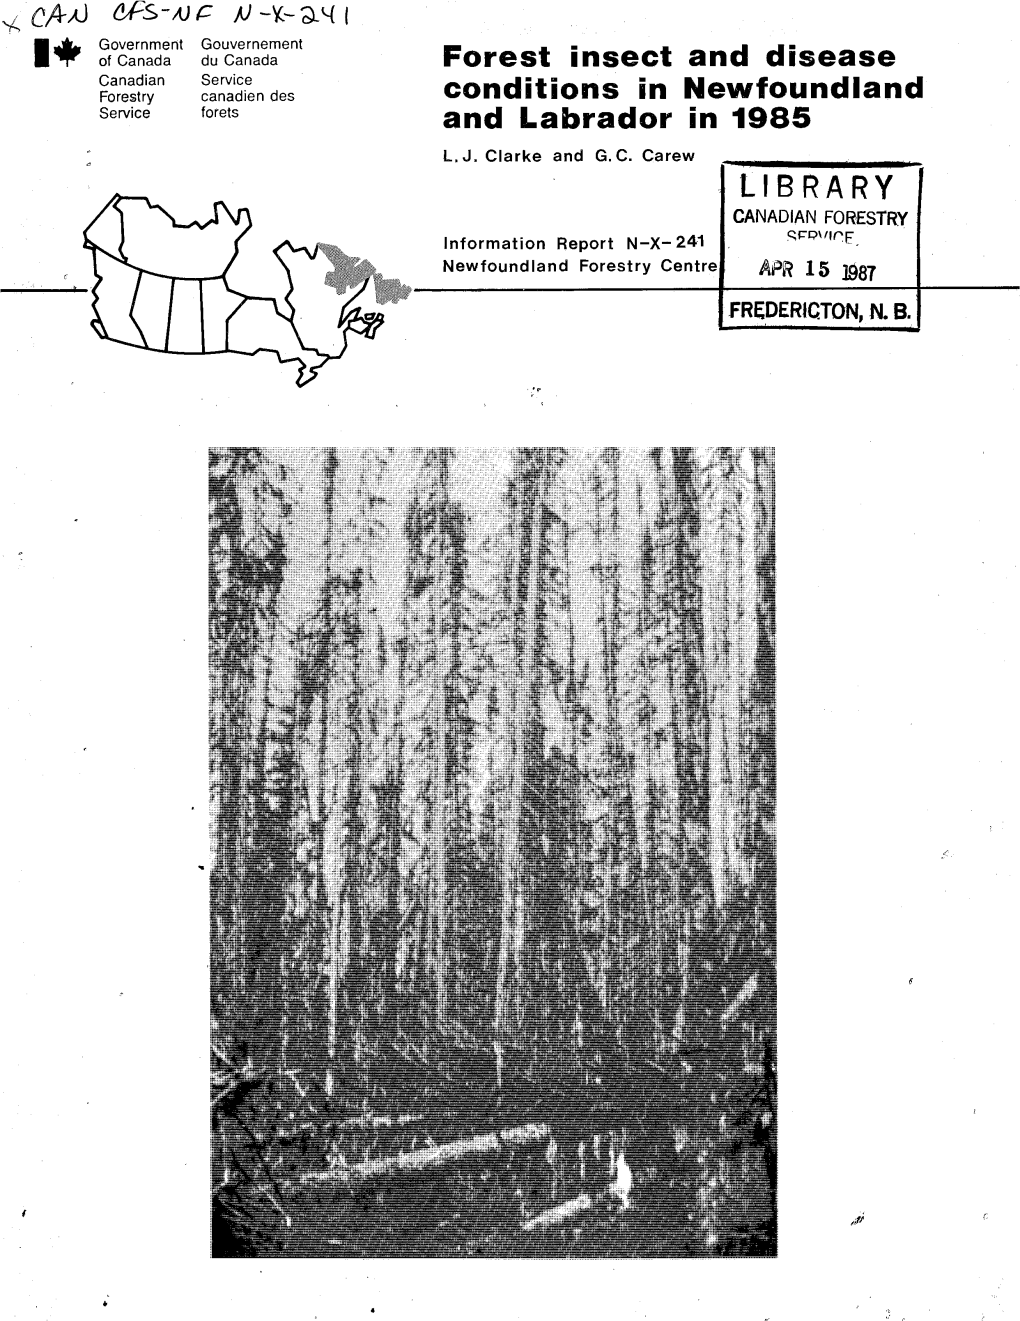 Forest Insect and Disease Conditions in Newfoundland and Labrador in 1985